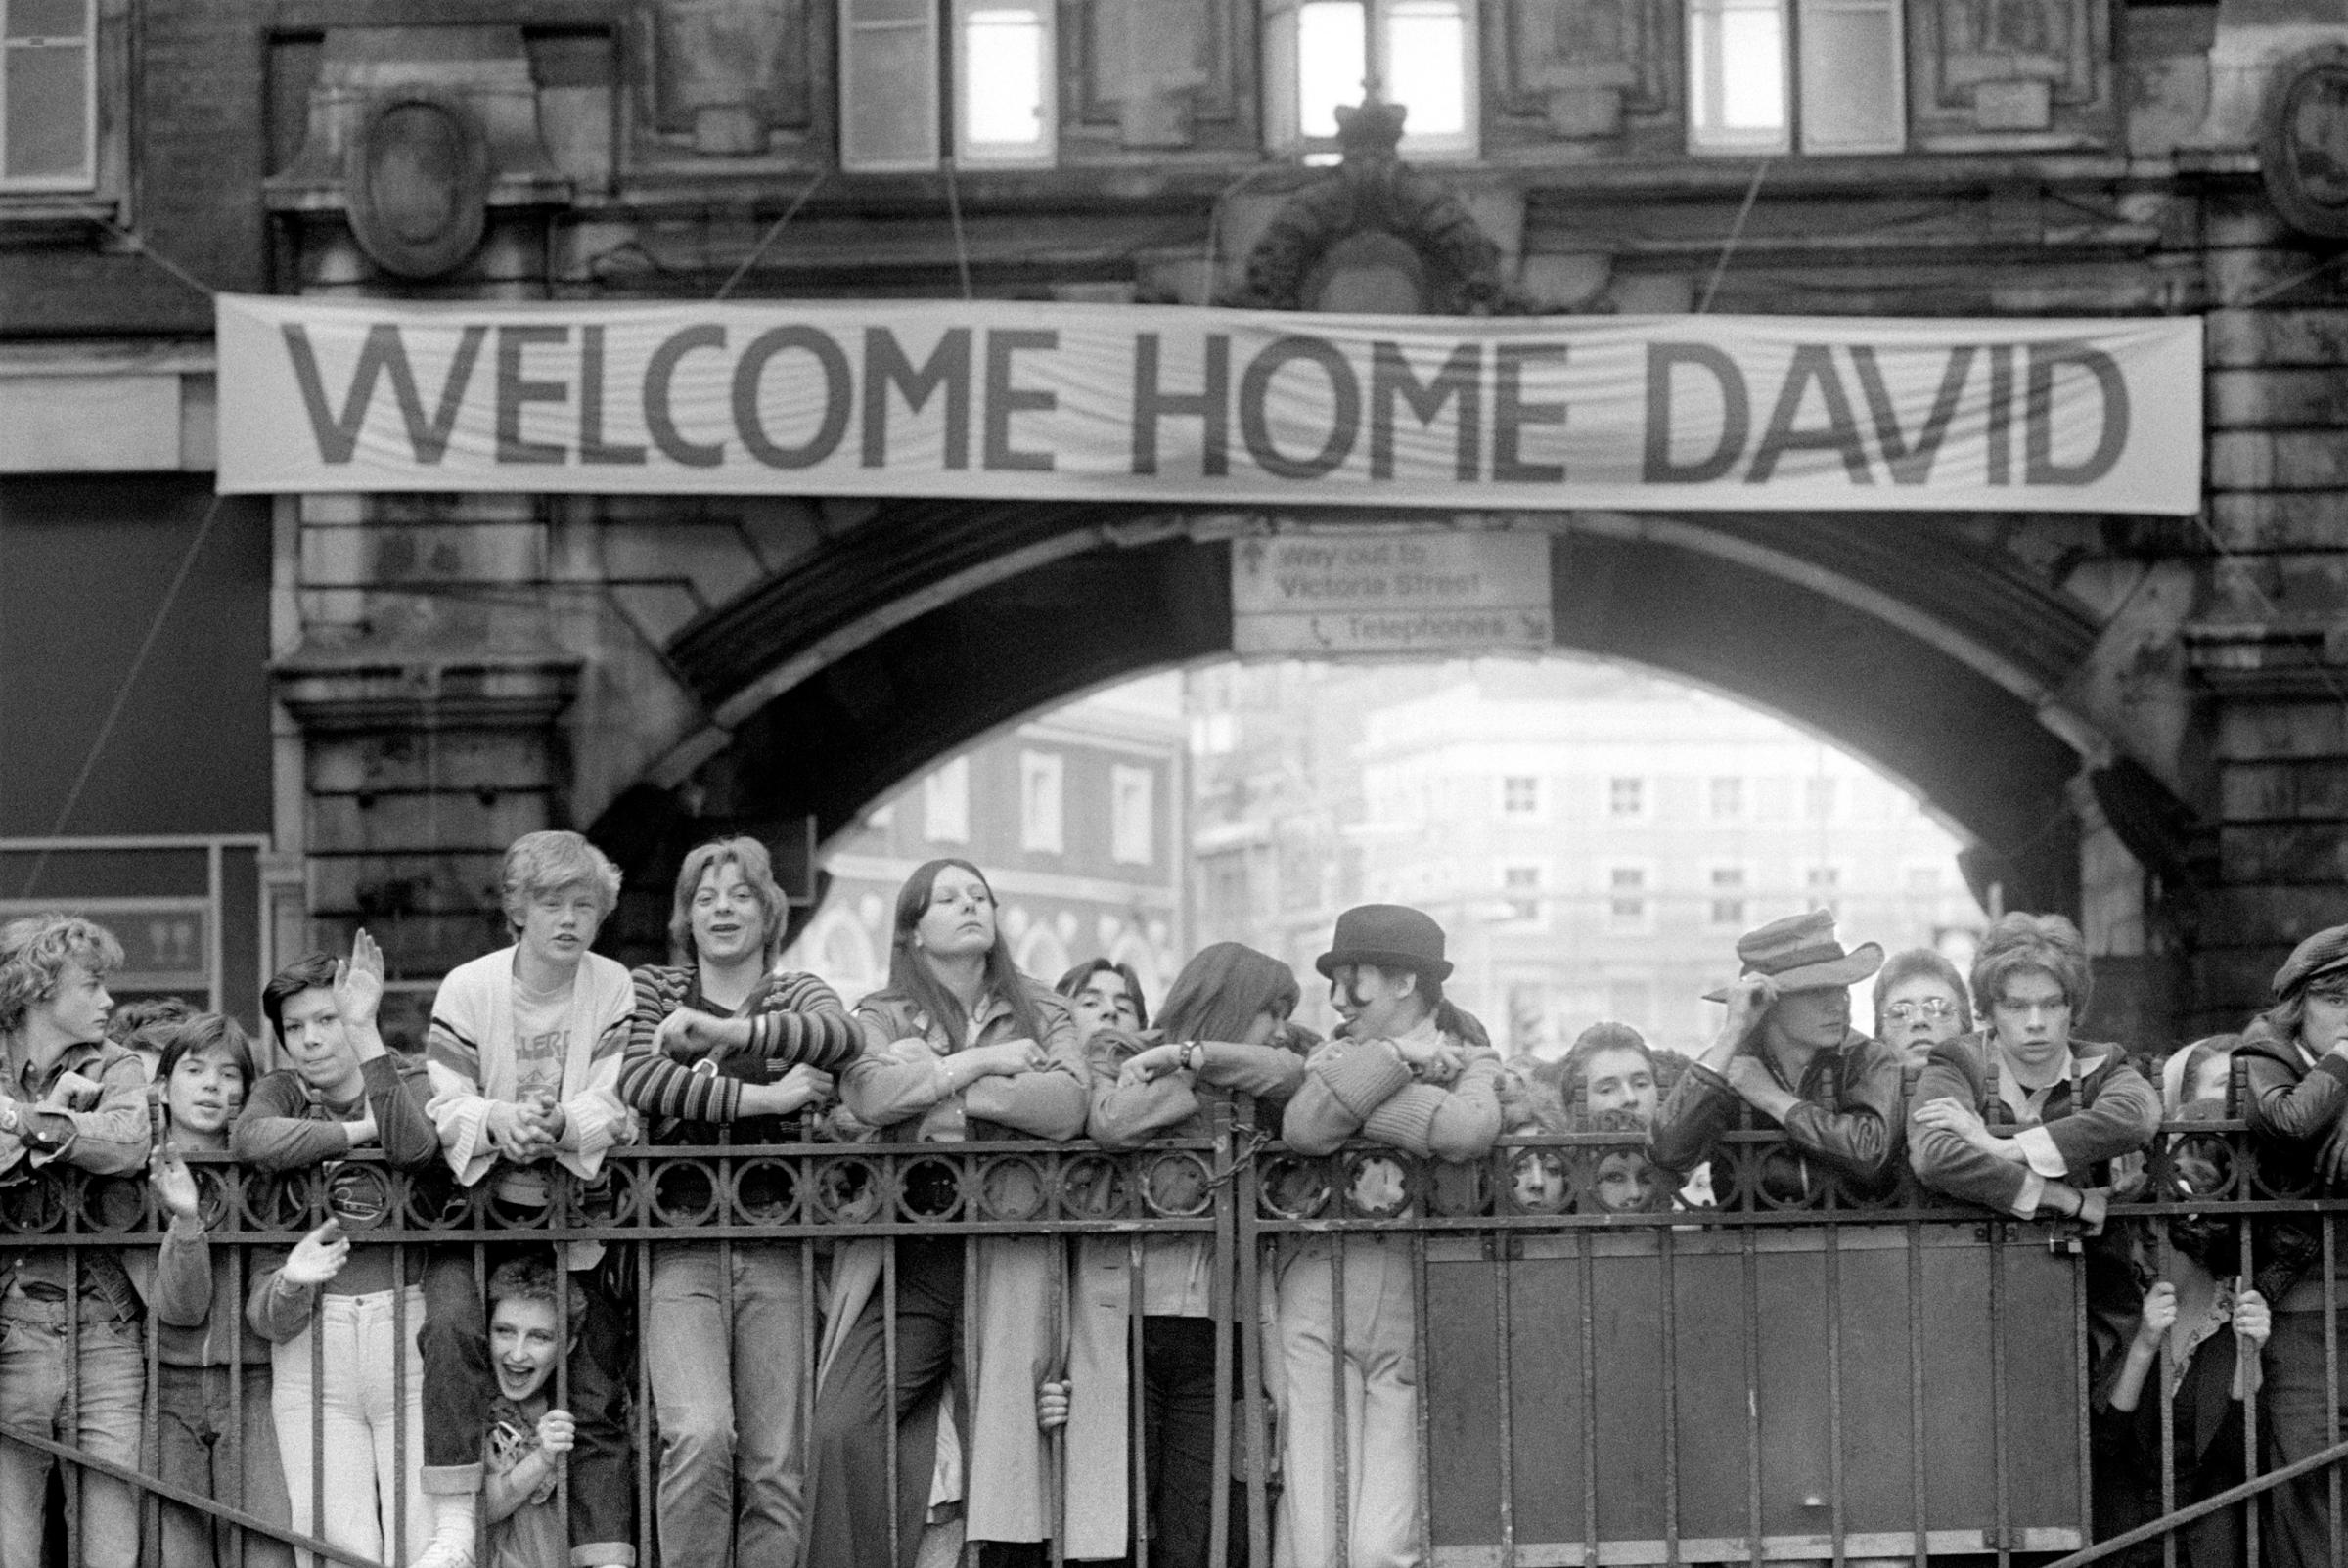 Hundreds of dedicated fans waited for hours anticipating Bowie's arrival into Victoria Station, London, U.K.